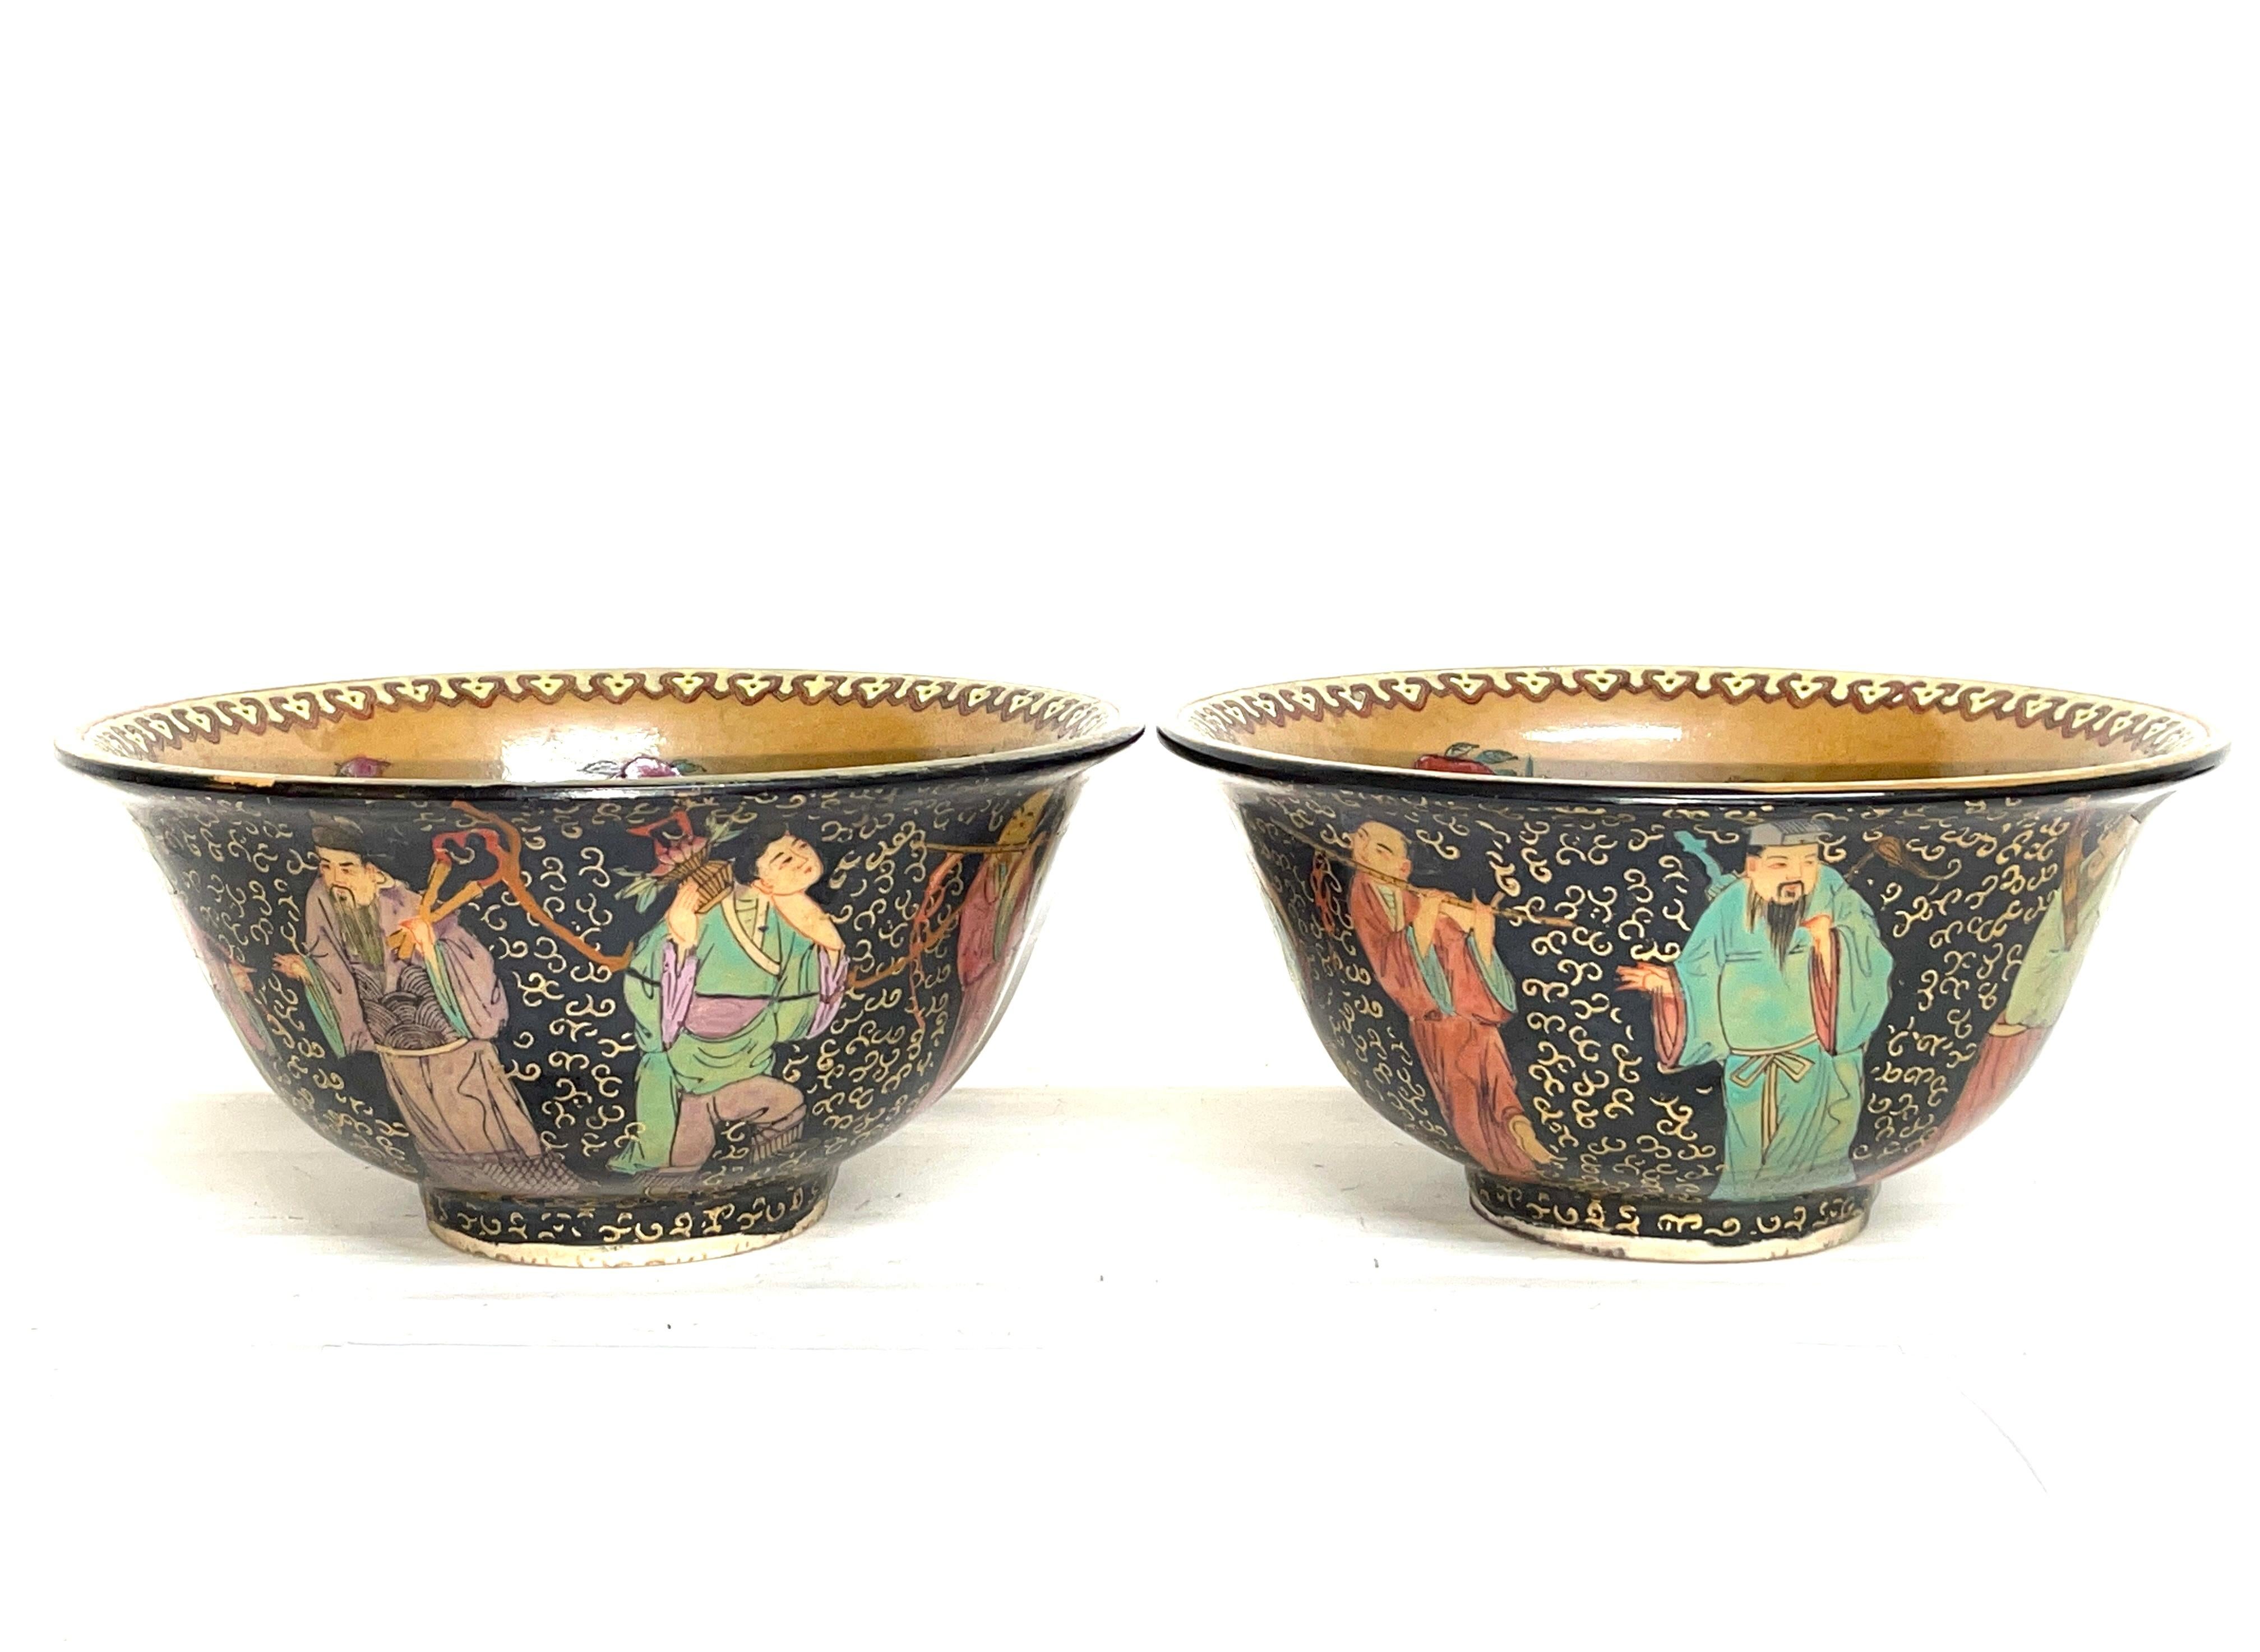 Pair of Antique Chinese Ceramic Bowls, 20th Century, Asian Art In Fair Condition For Sale In Berlin, DE